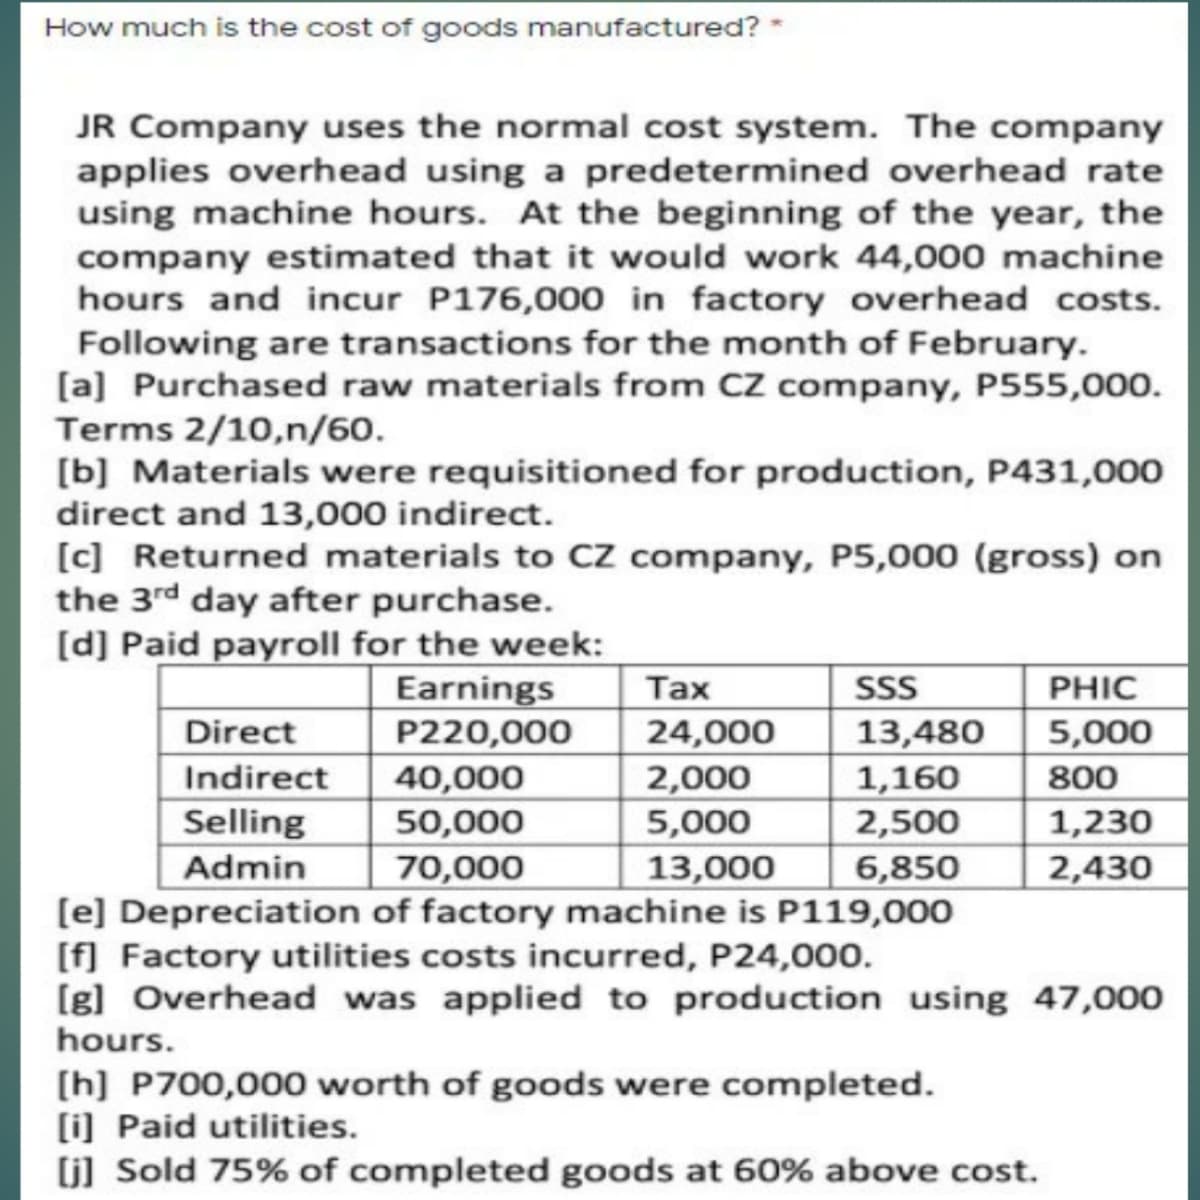 How much is the cost of goods manufactured? -
JR Company uses the normal cost system. The company
applies overhead using a predetermined overhead rate
using machine hours. At the beginning of the year, the
company estimated that it would work 44,000 machine
hours and incur P176,000 in factory overhead costs.
Following are transactions for the month of February.
[a] Purchased raw materials from CZ company, P555,000.
Terms 2/10,n/60.
[b] Materials were requisitioned for production, P431,000
direct and 13,000 indirect.
[c] Returned materials to Cz company, P5,000 (gross) on
the 3rd day after purchase.
[d] Paid payroll for the week:
Earnings
SSS
13,480
Таx
PHIC
Direct
Indirect
Selling
Admin
24,000
2,000
5,000
13,000
P220,000
5,000
40,000
50,000
1,160
2,500
800
1,230
70,000
(e] Depreciation of factory machine is P119,000
[f] Factory utilities costs incurred, P24,000.
(g] Overhead was applied to production using 47,00o
6,850
2,430
hours.
[h] P700,000 worth of goods were completed.
(i] Paid utilities.
(j] Sold 75% of completed goods at 60% above cost.
